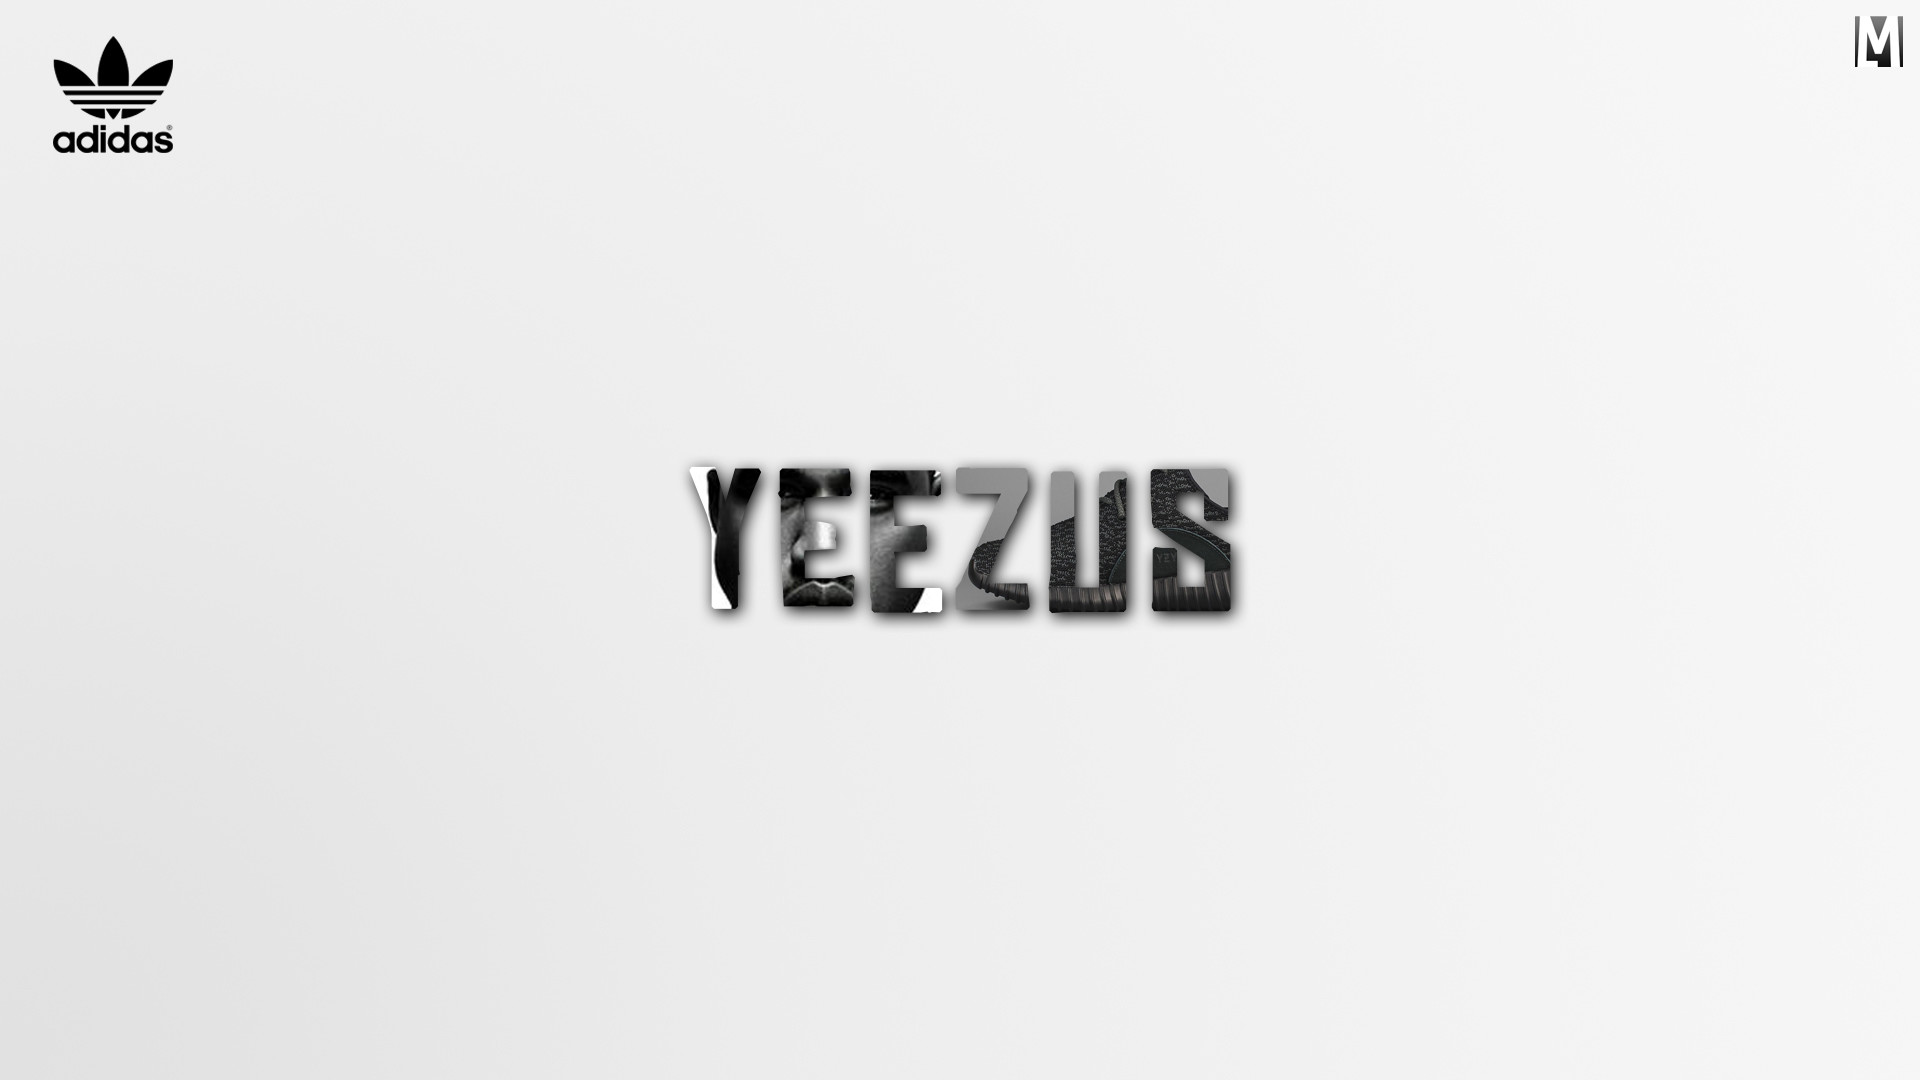 Image Of ☆ New ☆ Yeezy 350 Collection Print - Yeezy Background - HD Wallpaper 